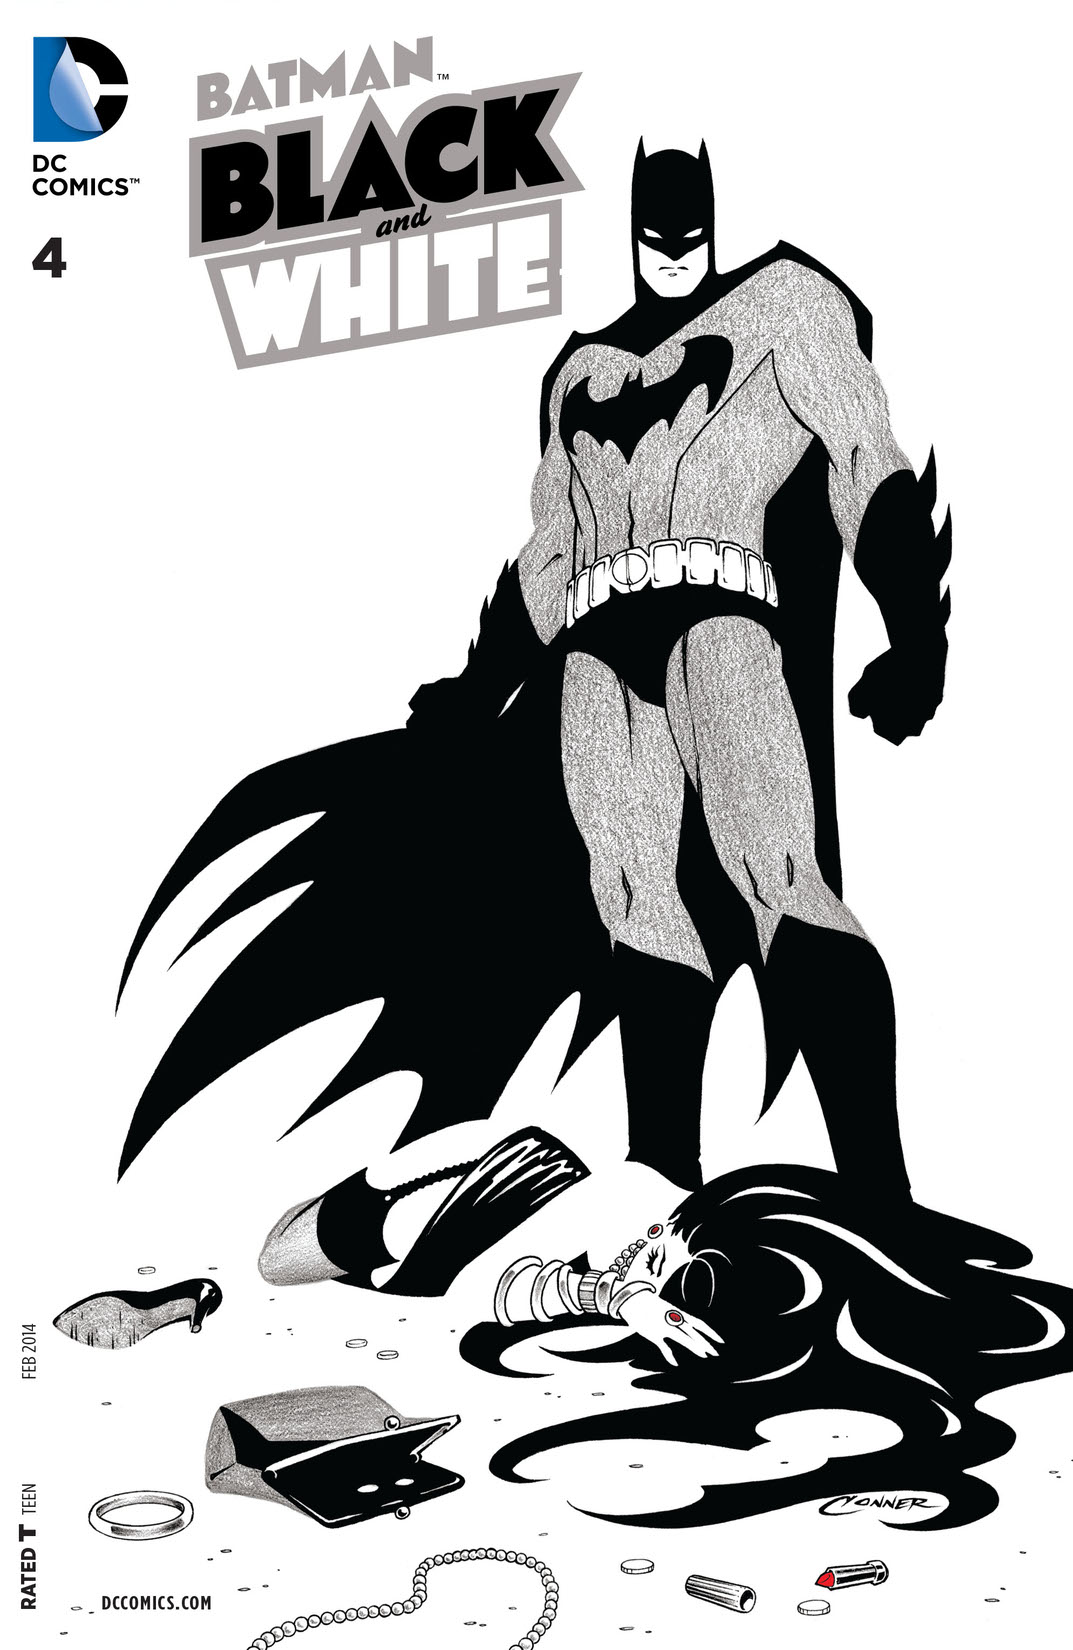 Batman Black and White (2013-) #4 preview images